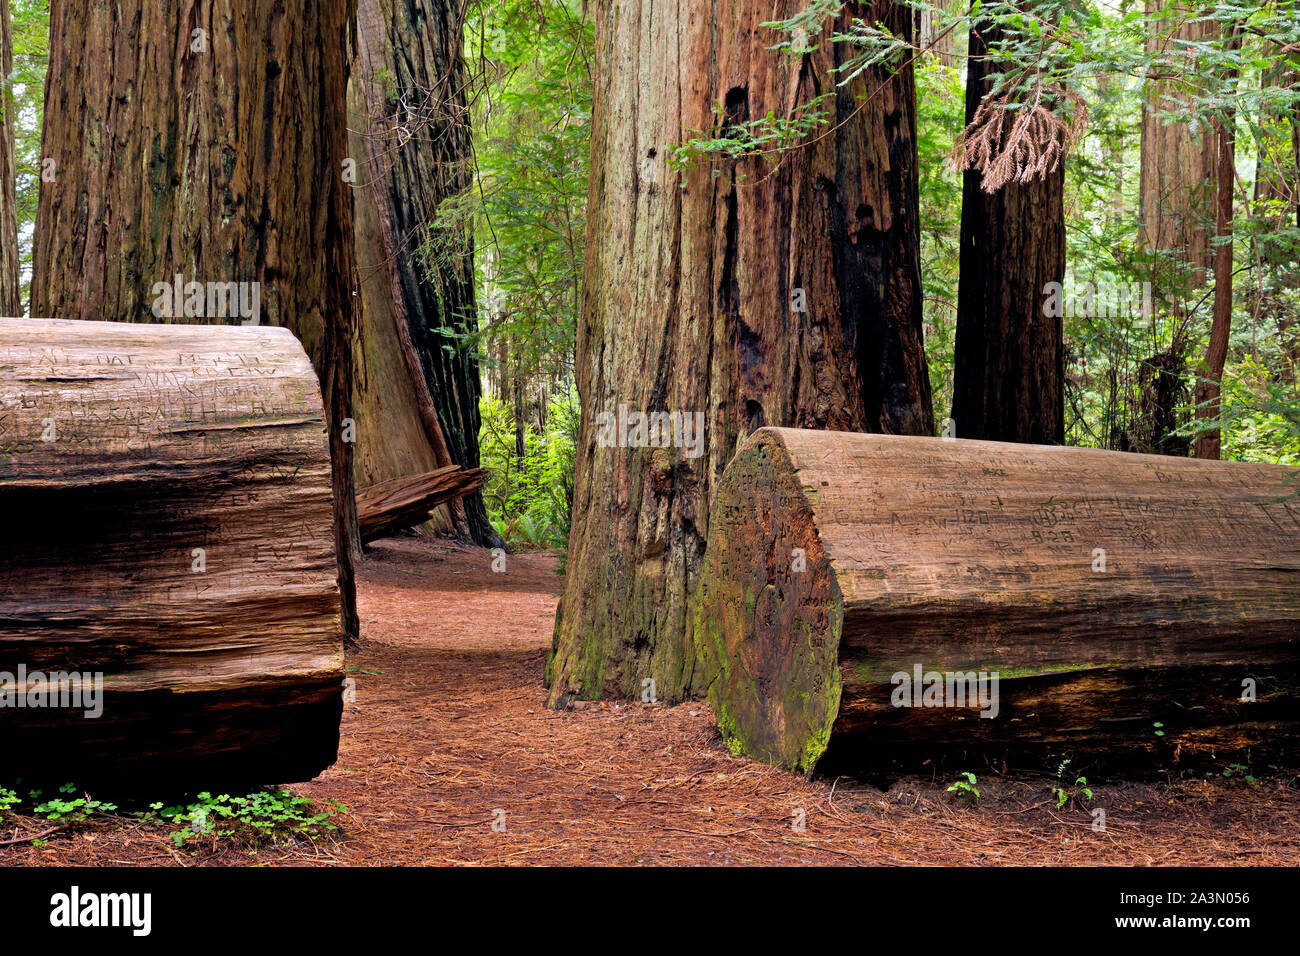 CA03638-00...CALIFORNIA - Loop trail through the redwood trees through Stout Grove in the Jedediah Smith Redwoods State Park. Stock Photo